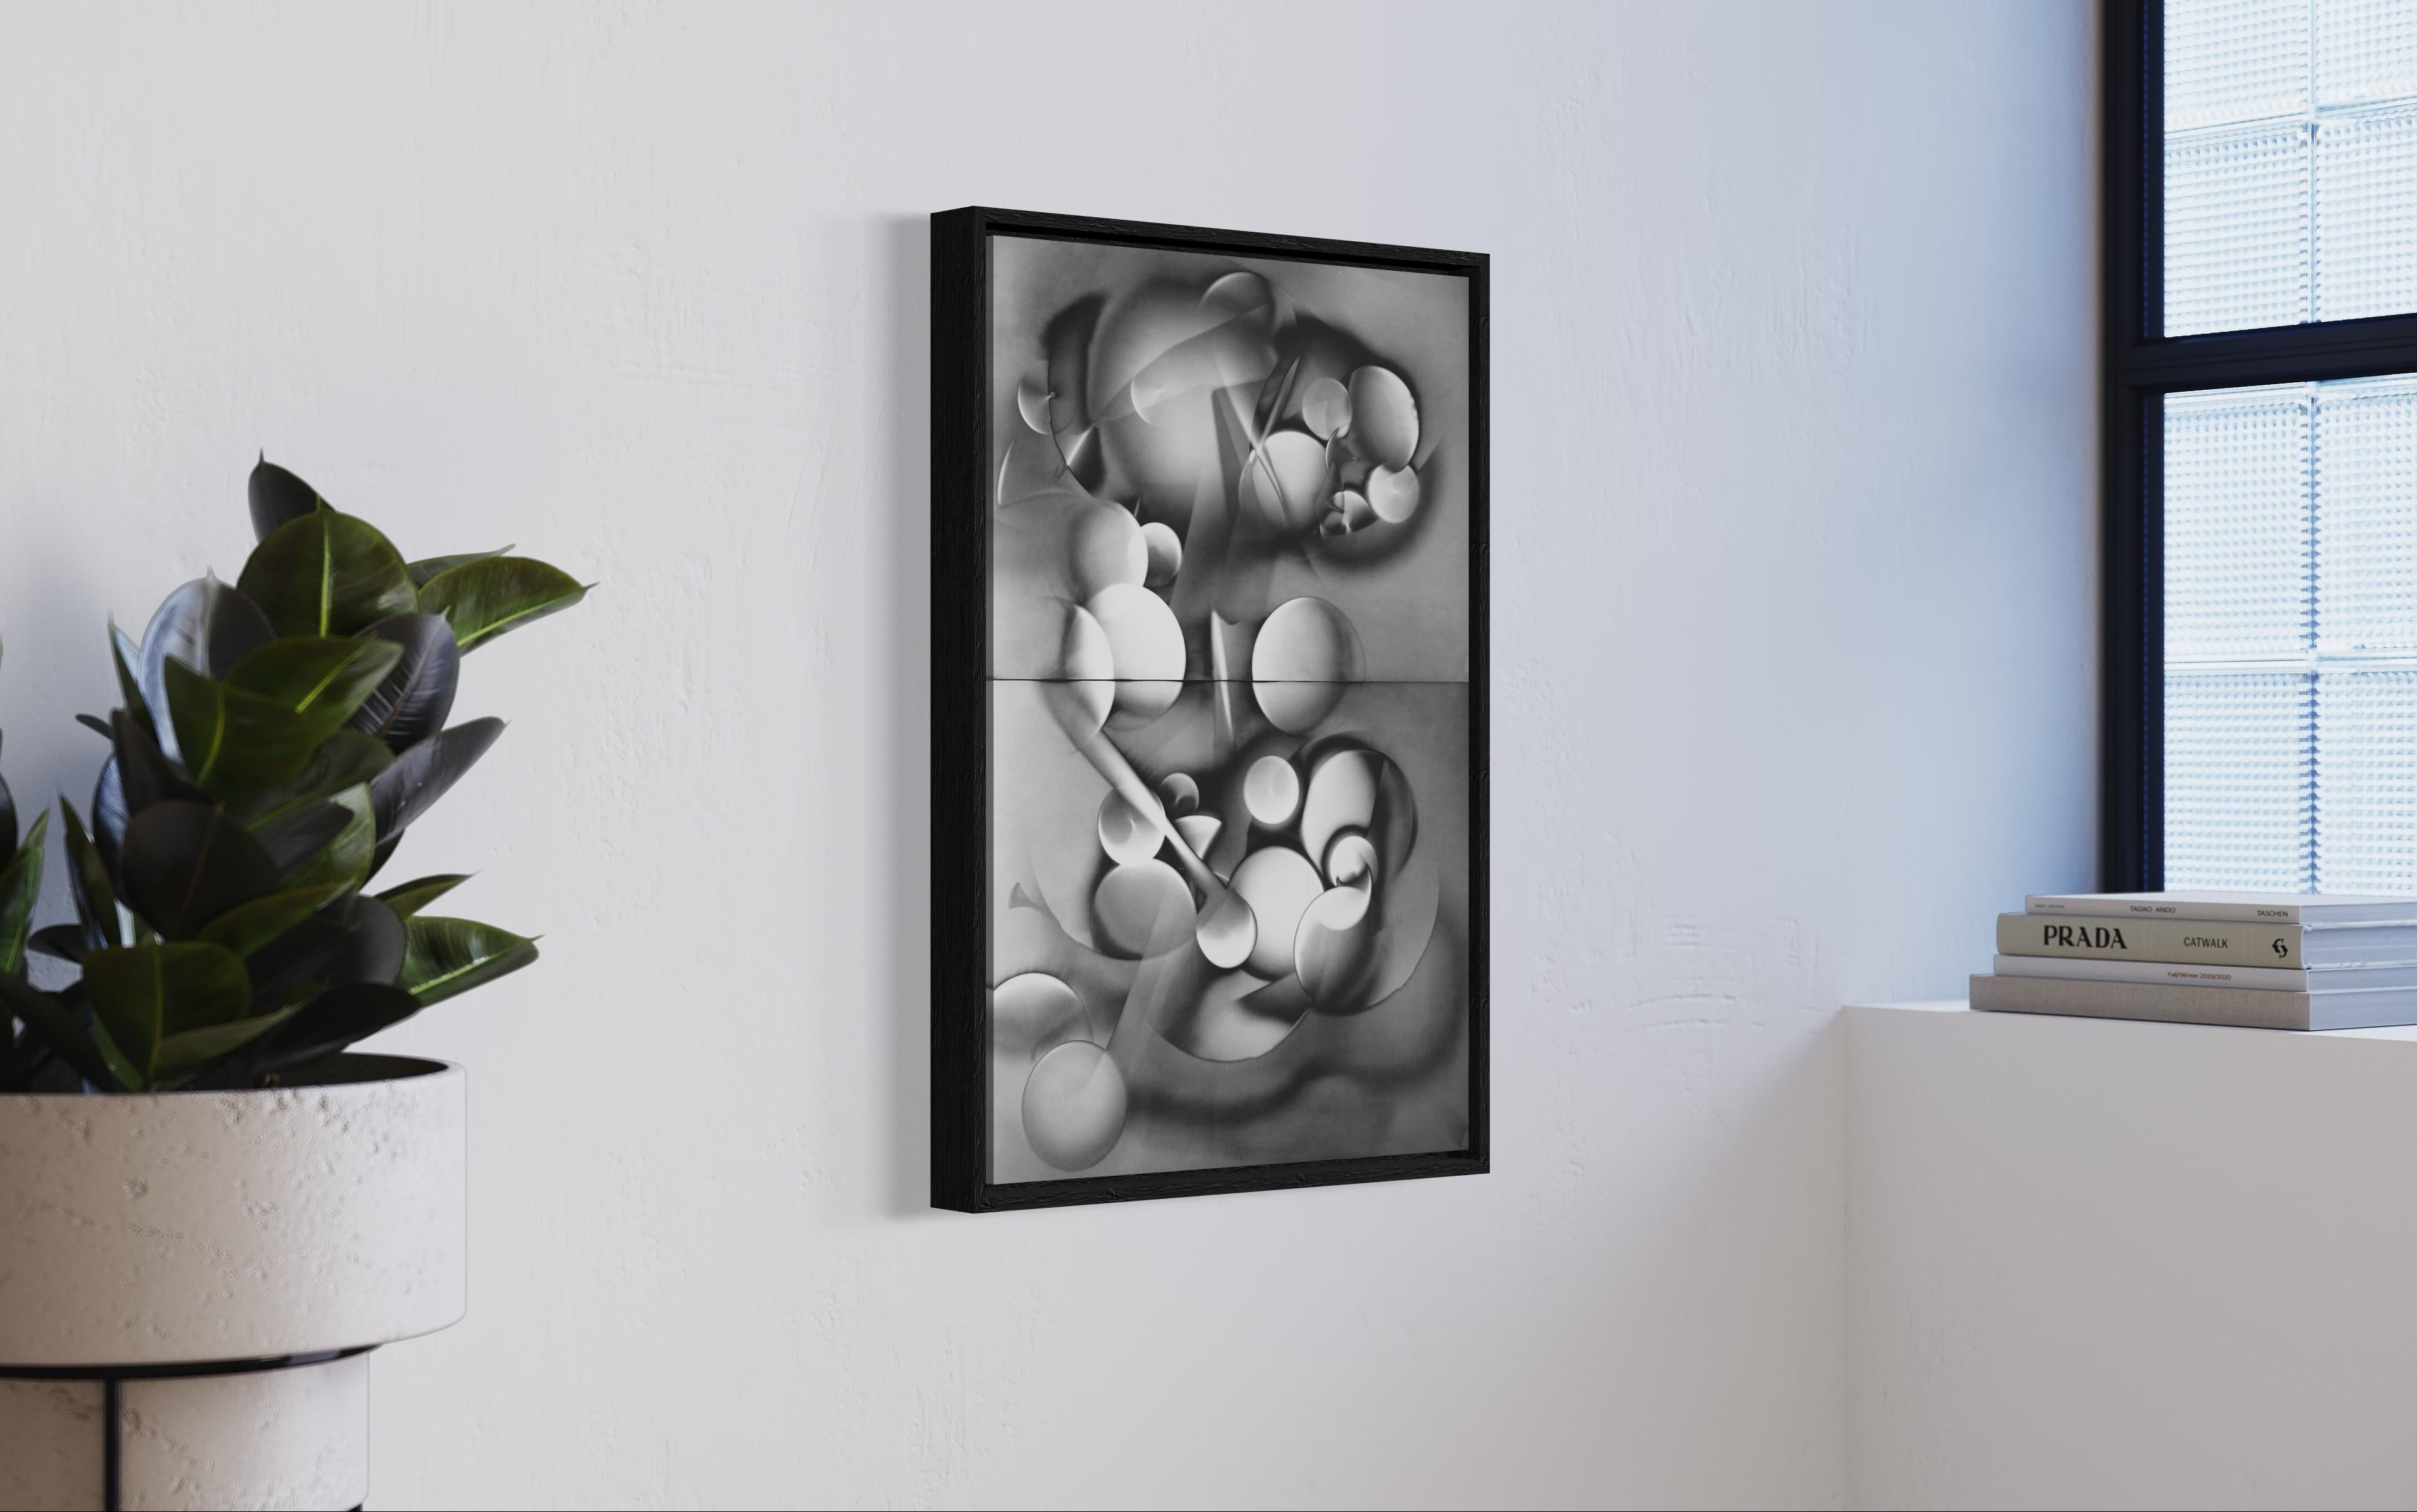  The Self Representation of Light #412, 2 x Luminograms as one work For Sale 3